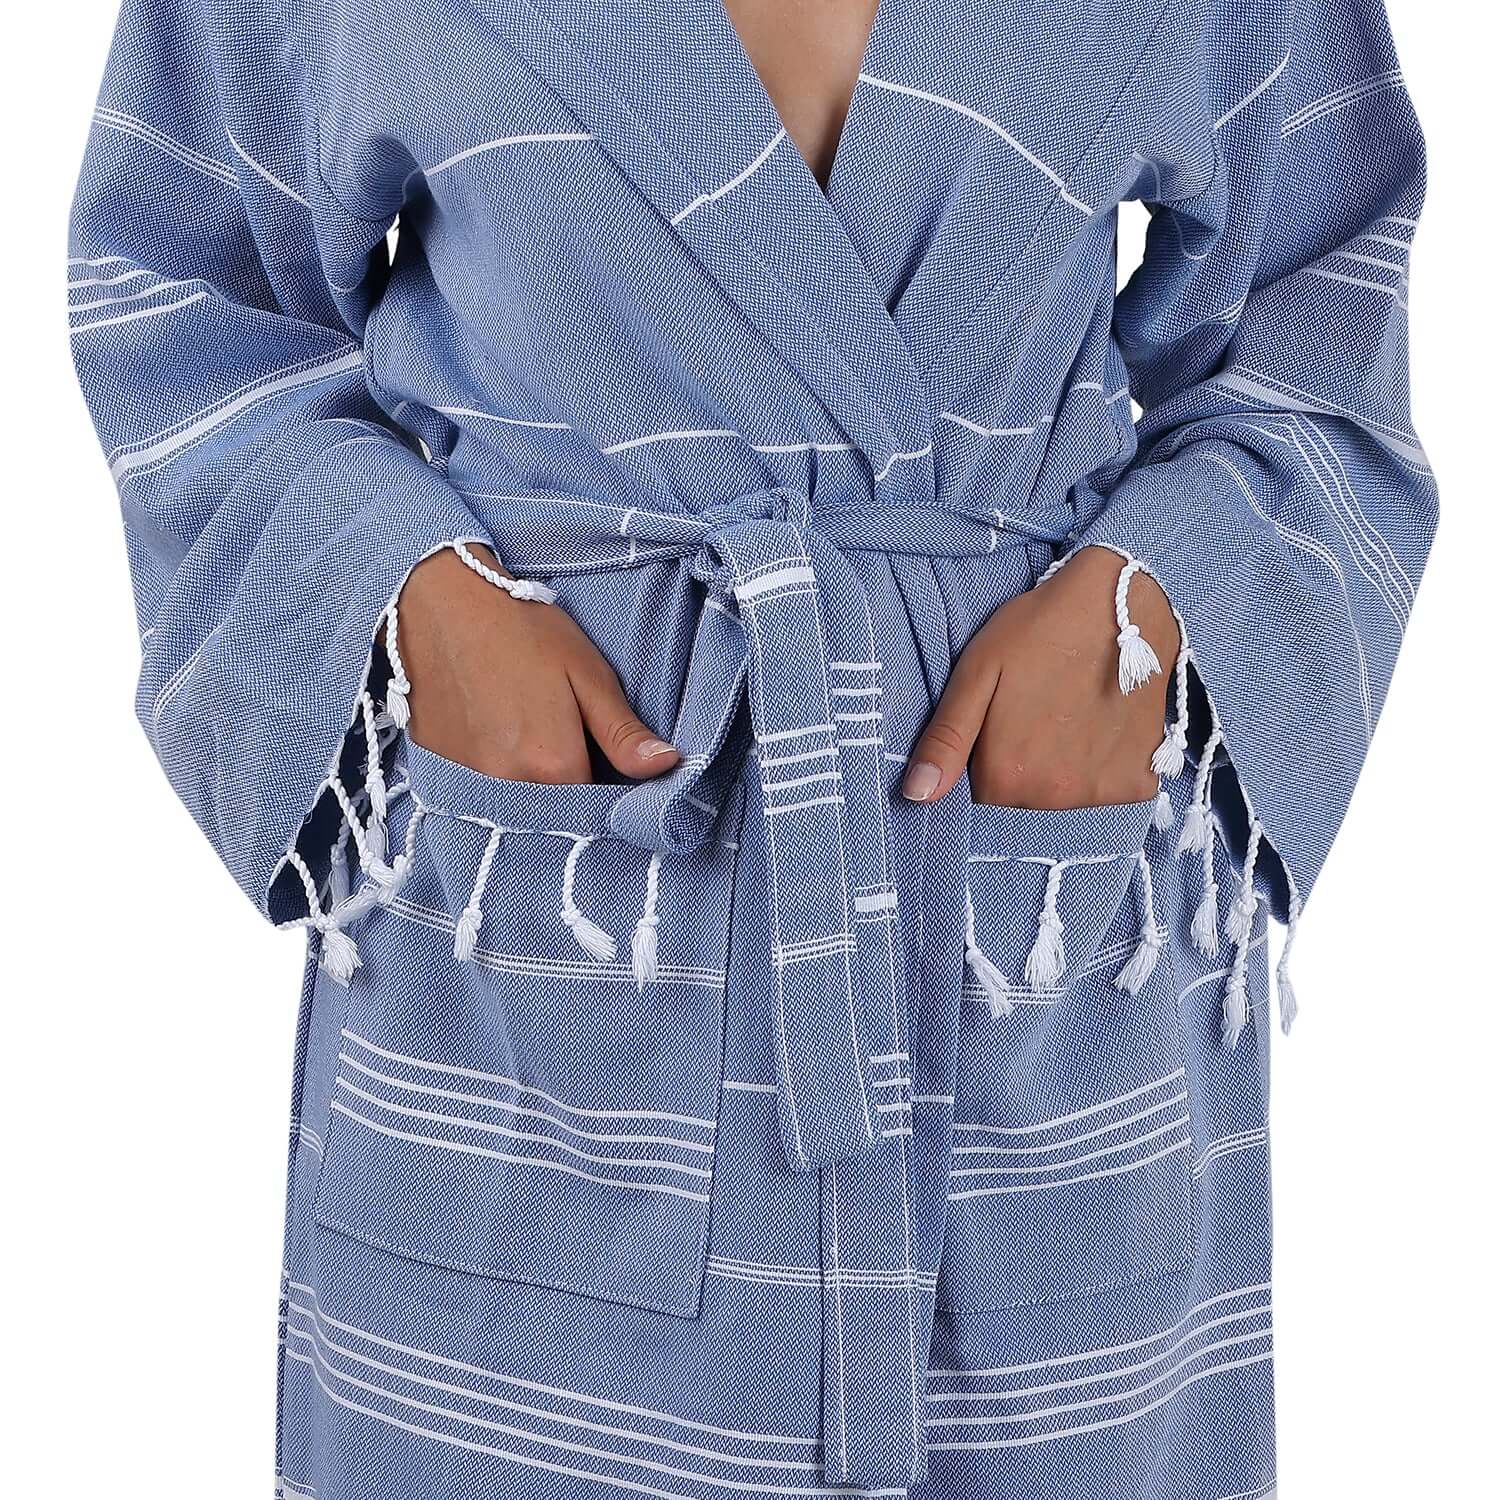 Close-up view of the Loom Legacy xsmall/small blue bathrobe, highlighting the intricate white stripe pattern, the tie belt, and the fringe detailing on the pockets